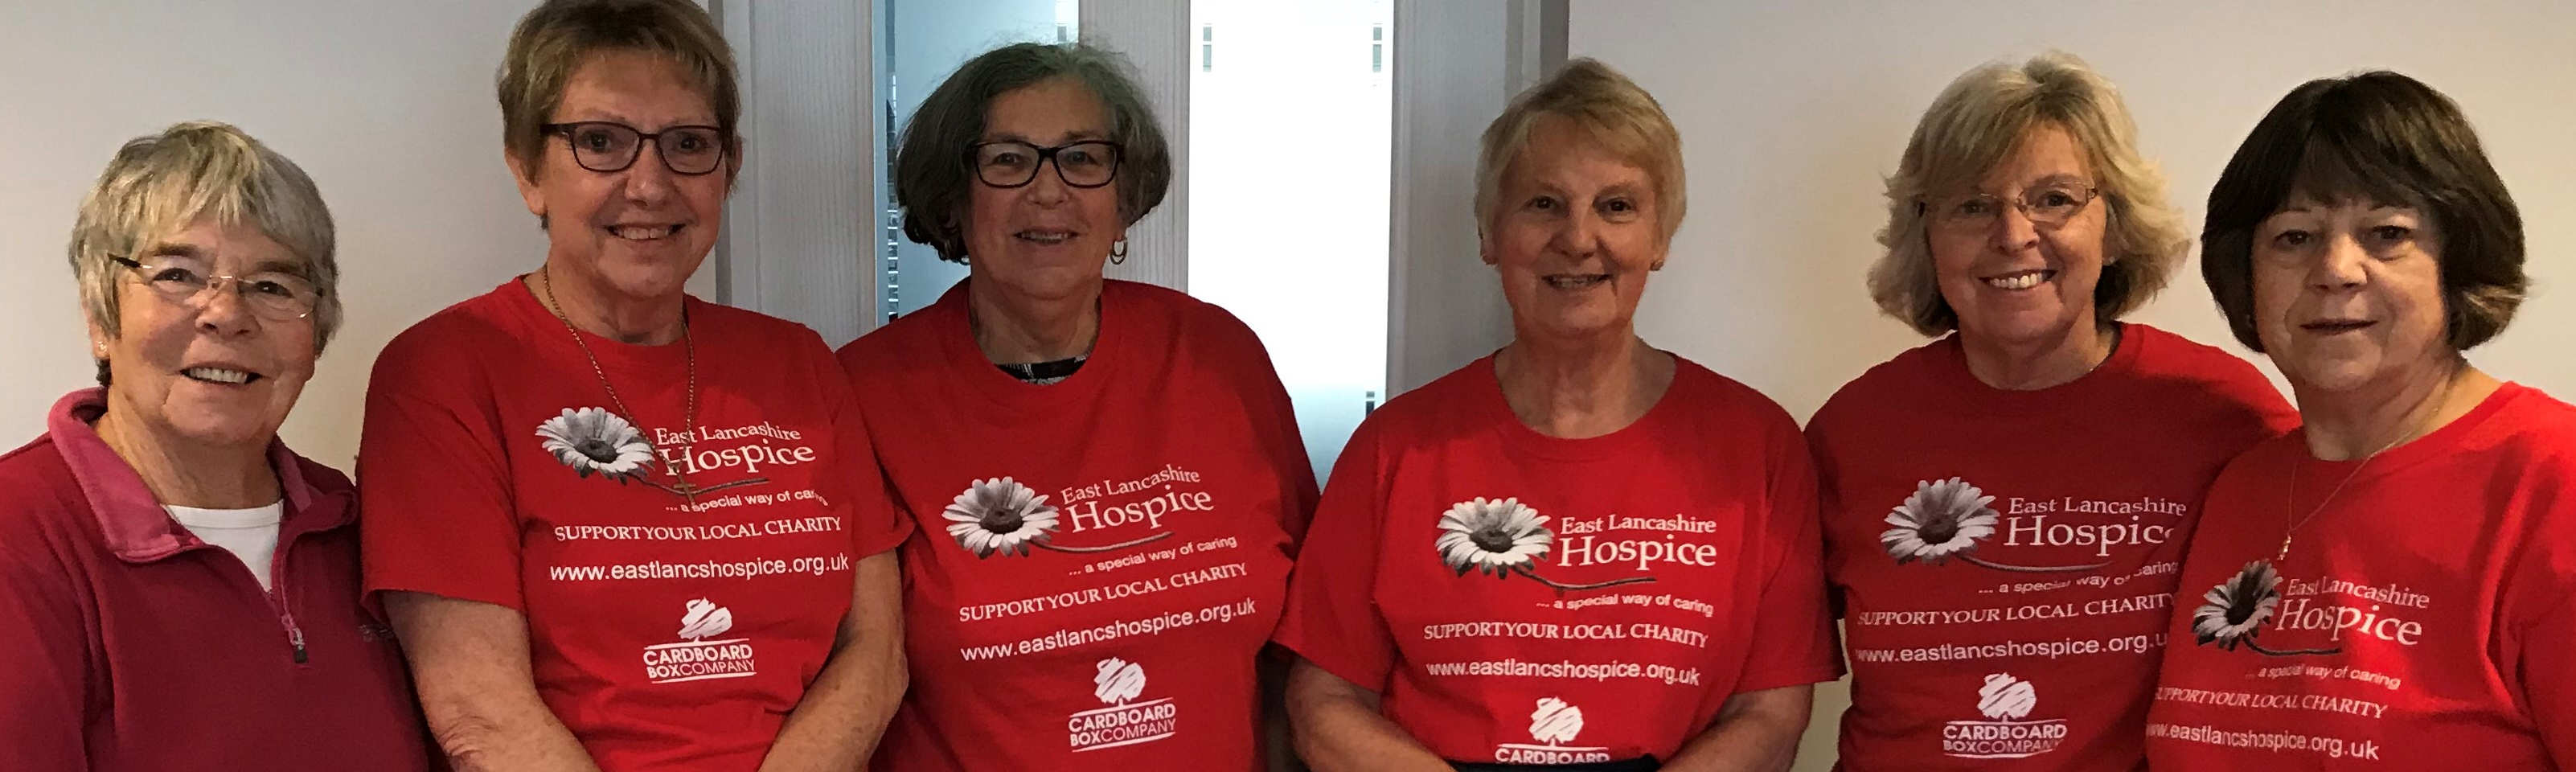 Contact East Lancashire Hospice